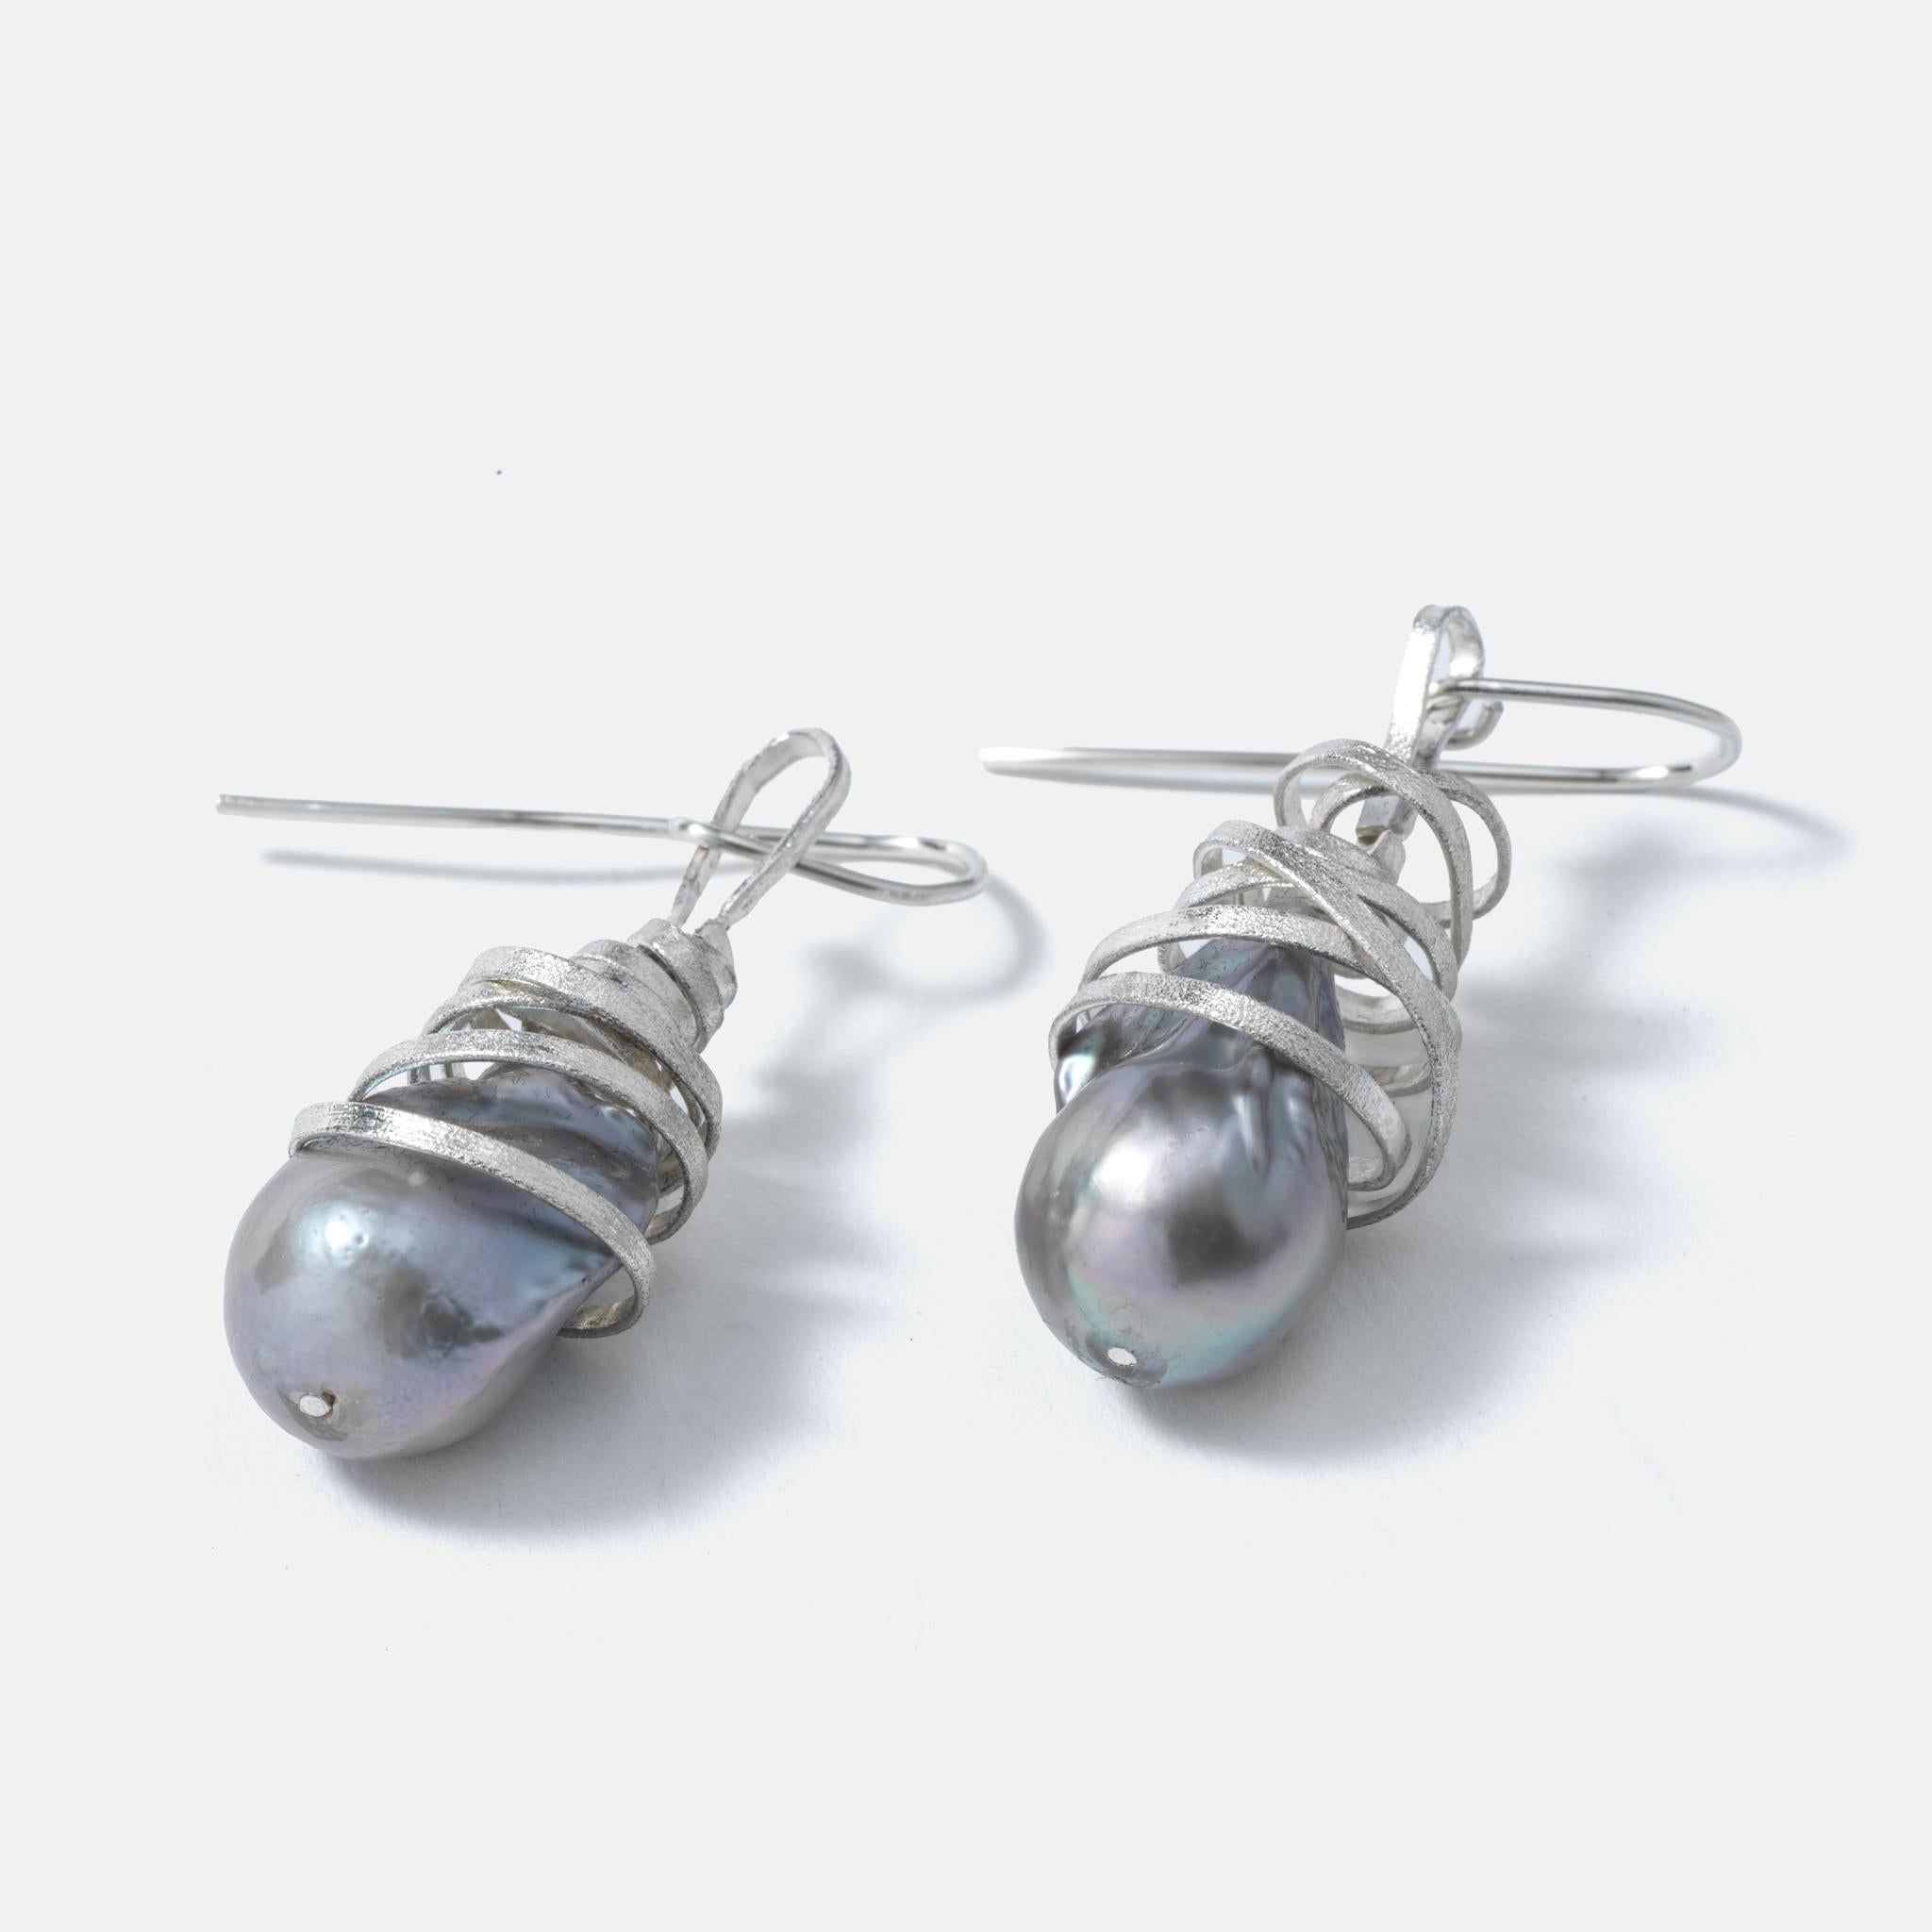 Uncut A pair of silver and pearl ear rings. Handmade 2023 in Lund Sweden. For Sale